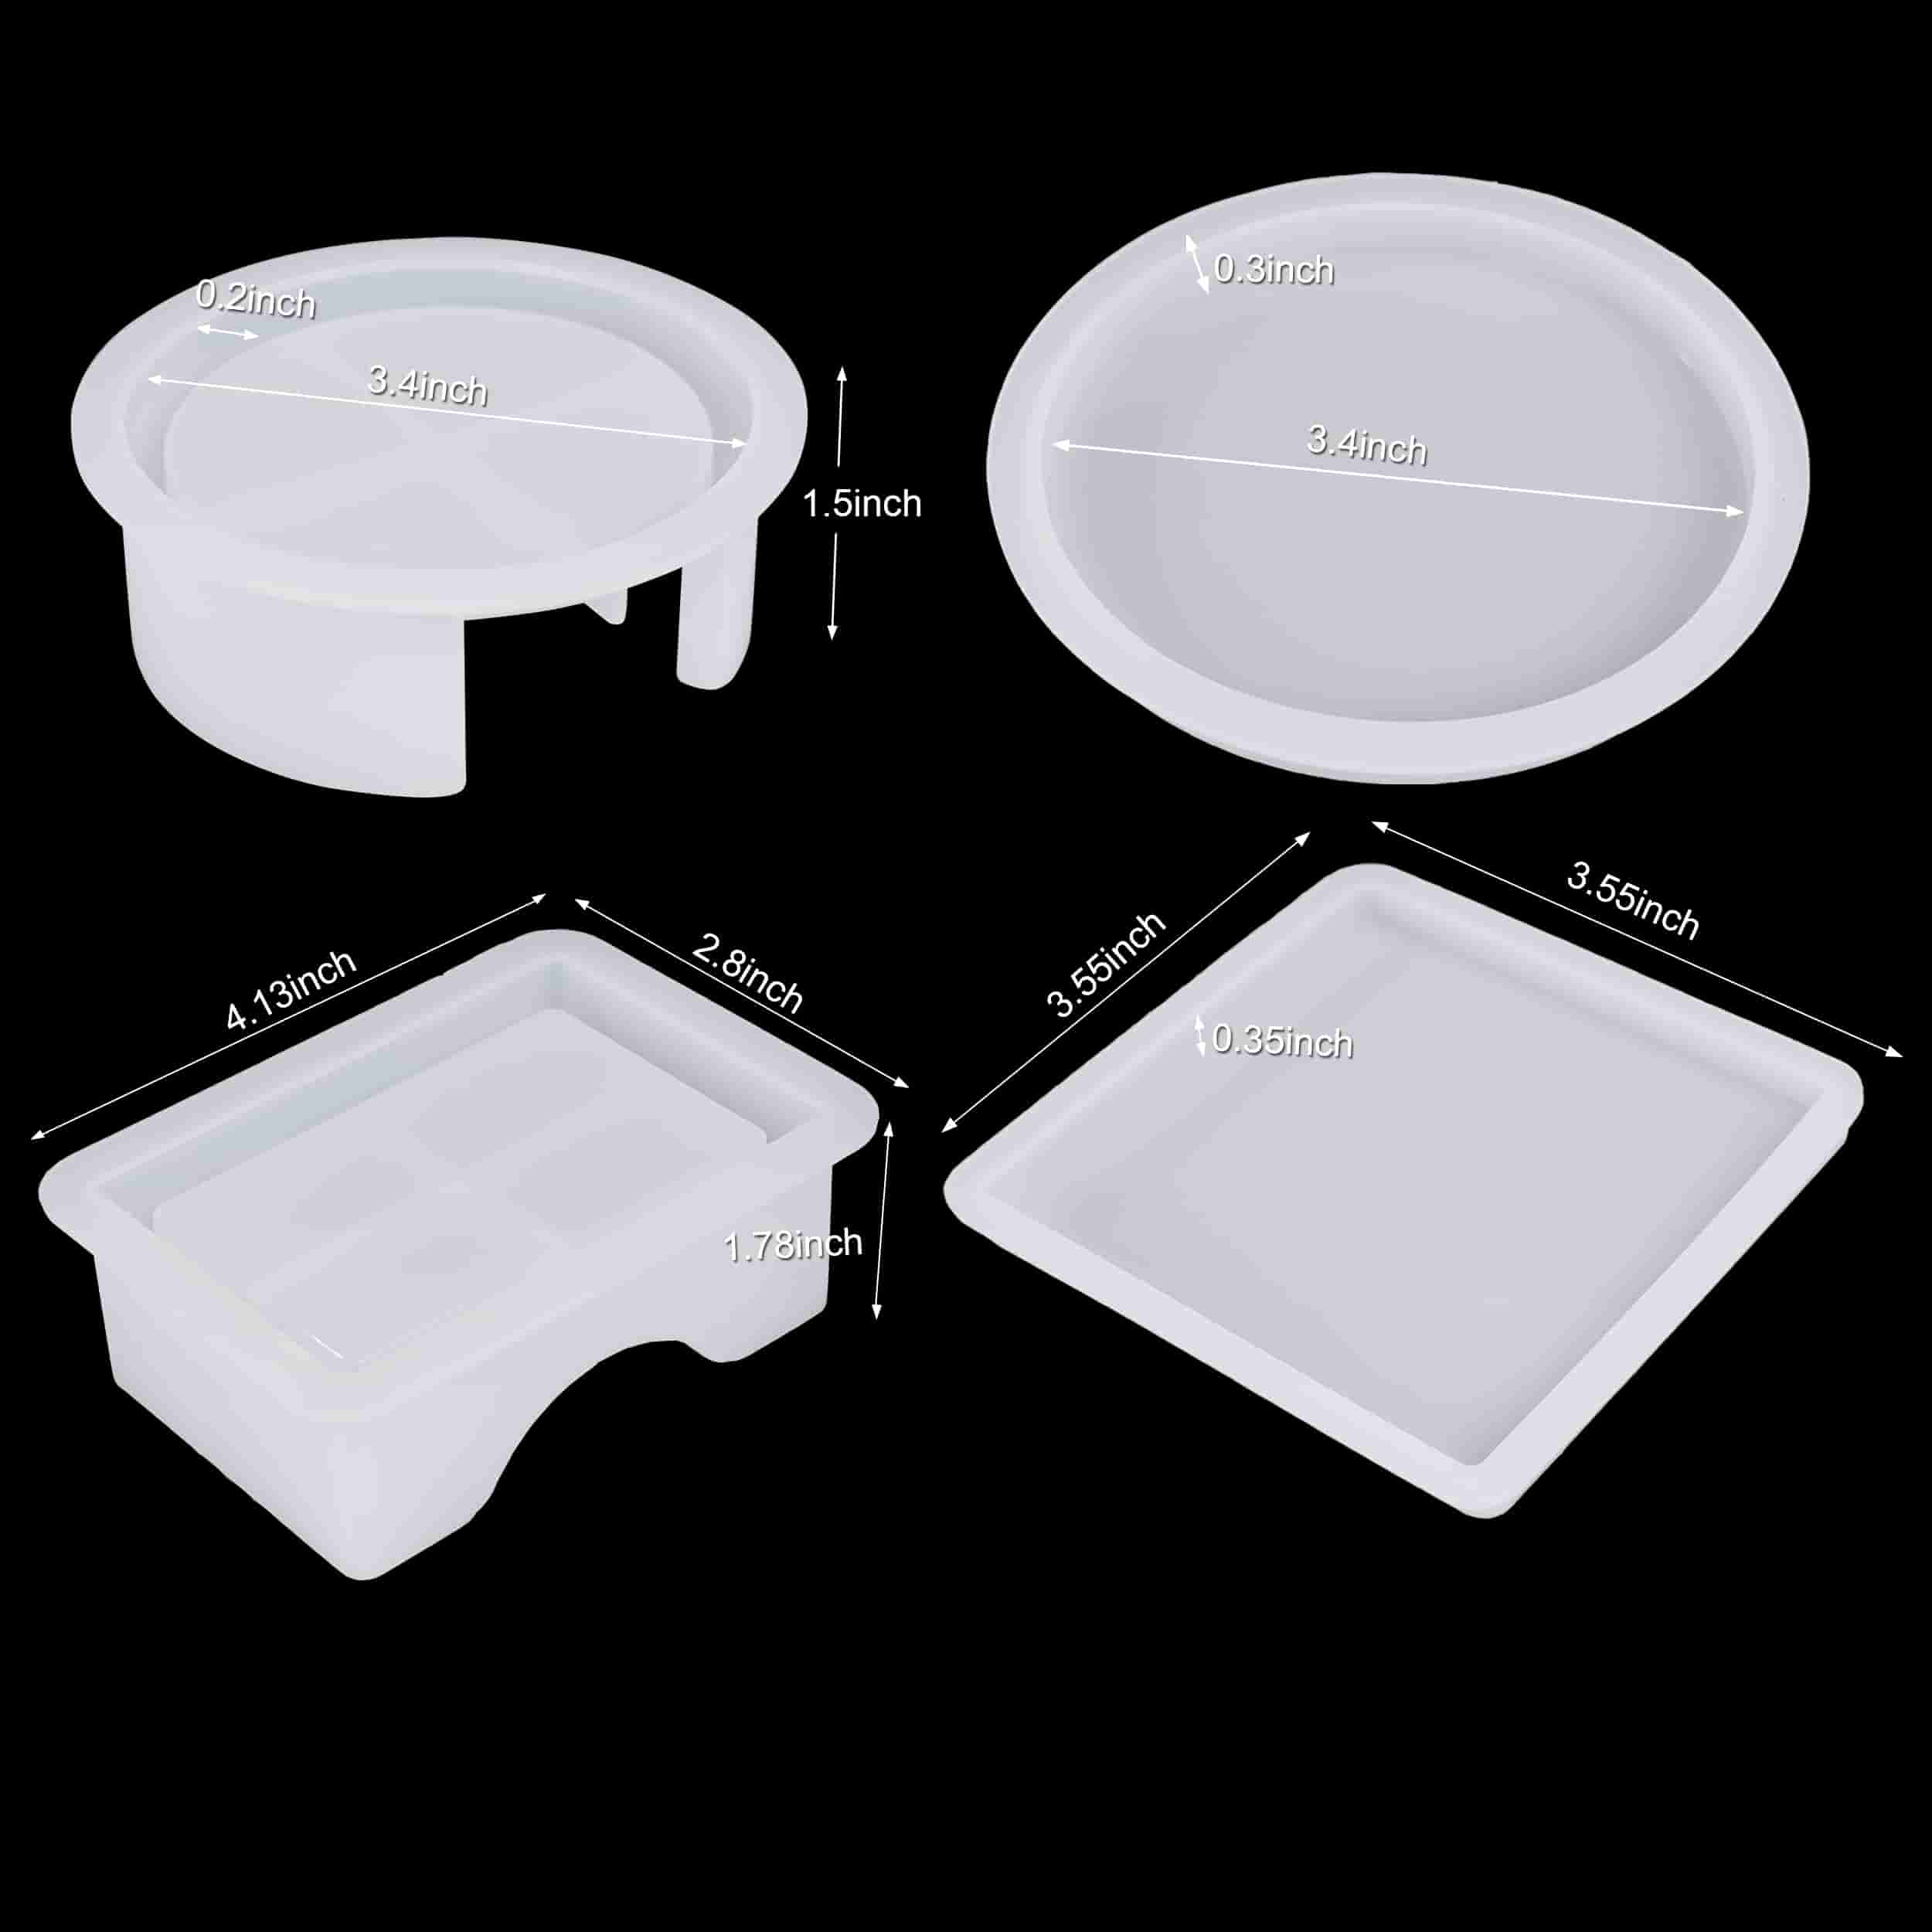  LET'S RESIN Resin Molds Silicone Kit for Beginners,7 PCS Large Epoxy  Resin Molds Including Pyramid, Sphere,Cube, Rectangle,Candle Holder Resin  Molds,Round/Square Coaster Molds for Resin Casting : Arts, Crafts & Sewing